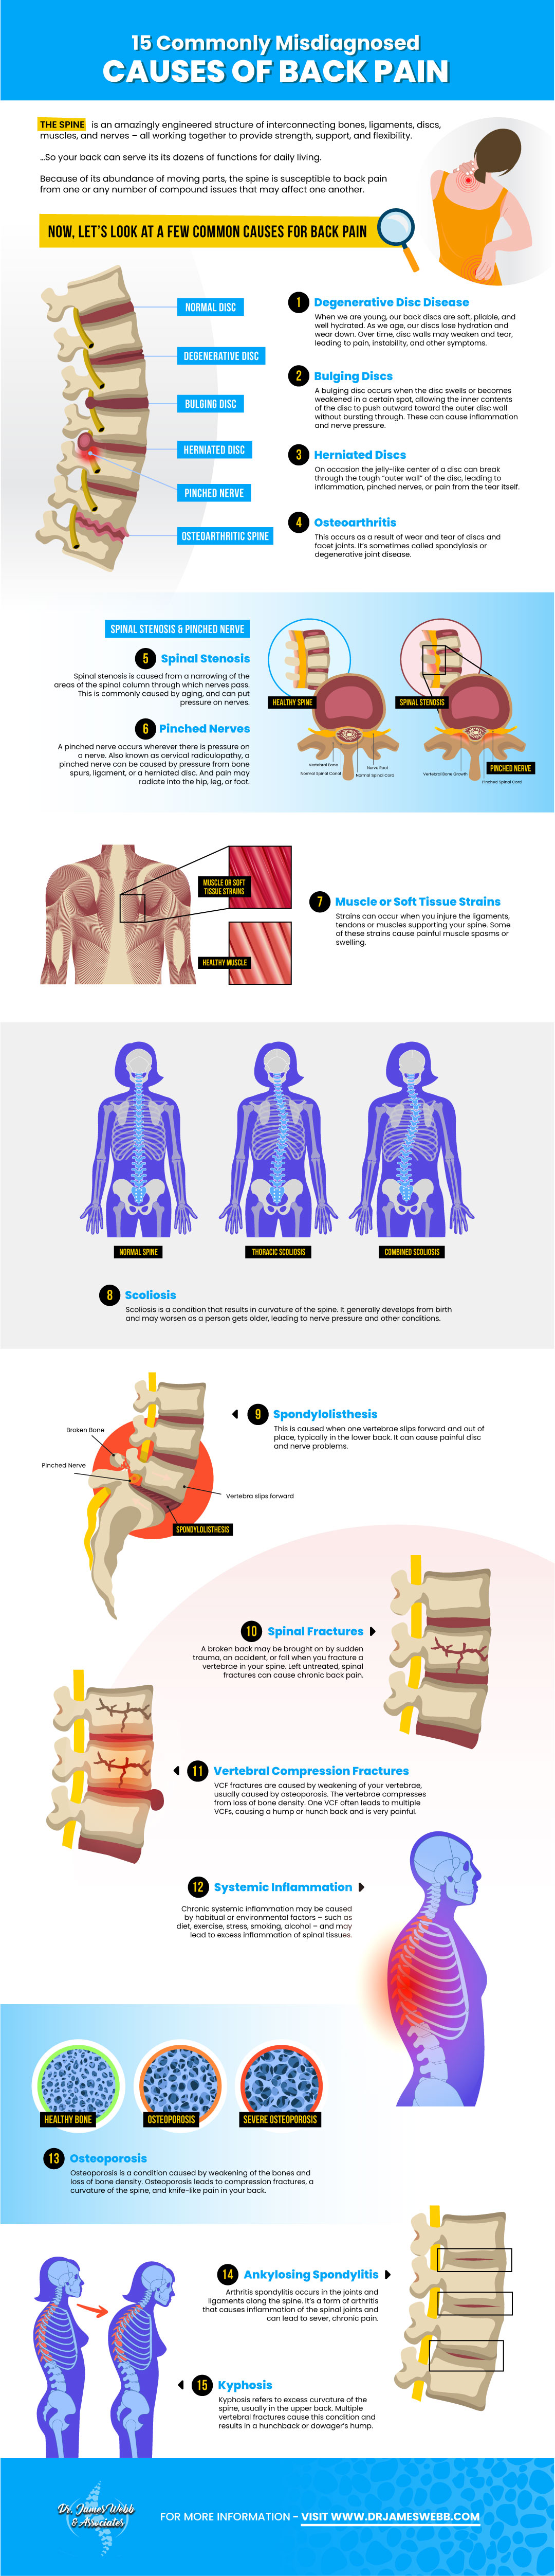 15 Commonly Misdiagnosed Causes of Back Pain Infographic